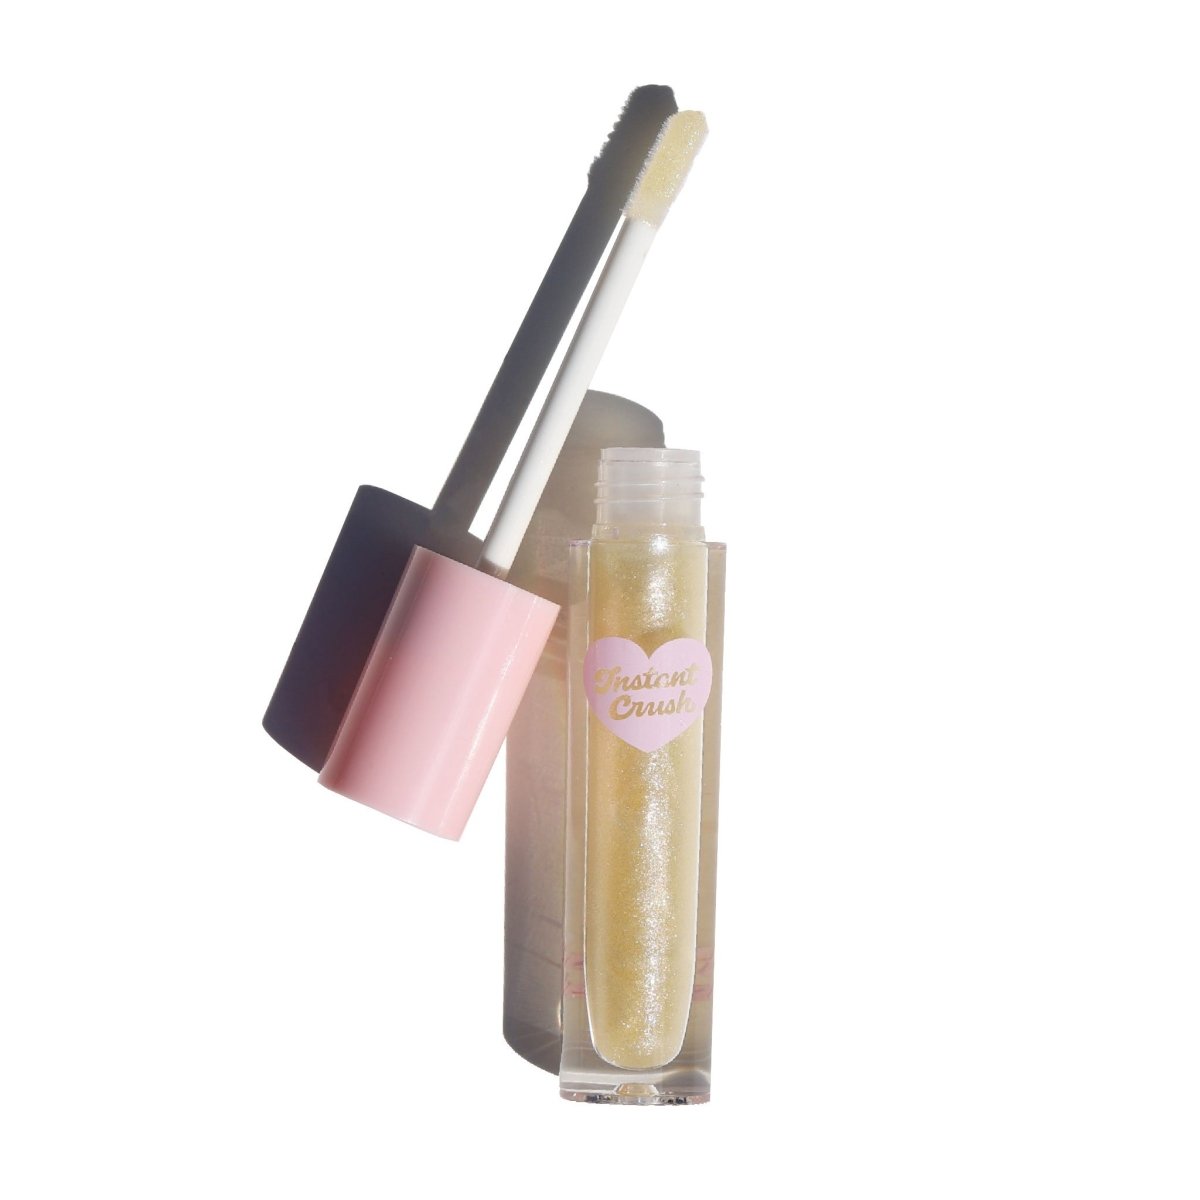 Clear lip gloss with shimmer in a pink tube - Instant Crush - Sparkle Motion - Half Caked